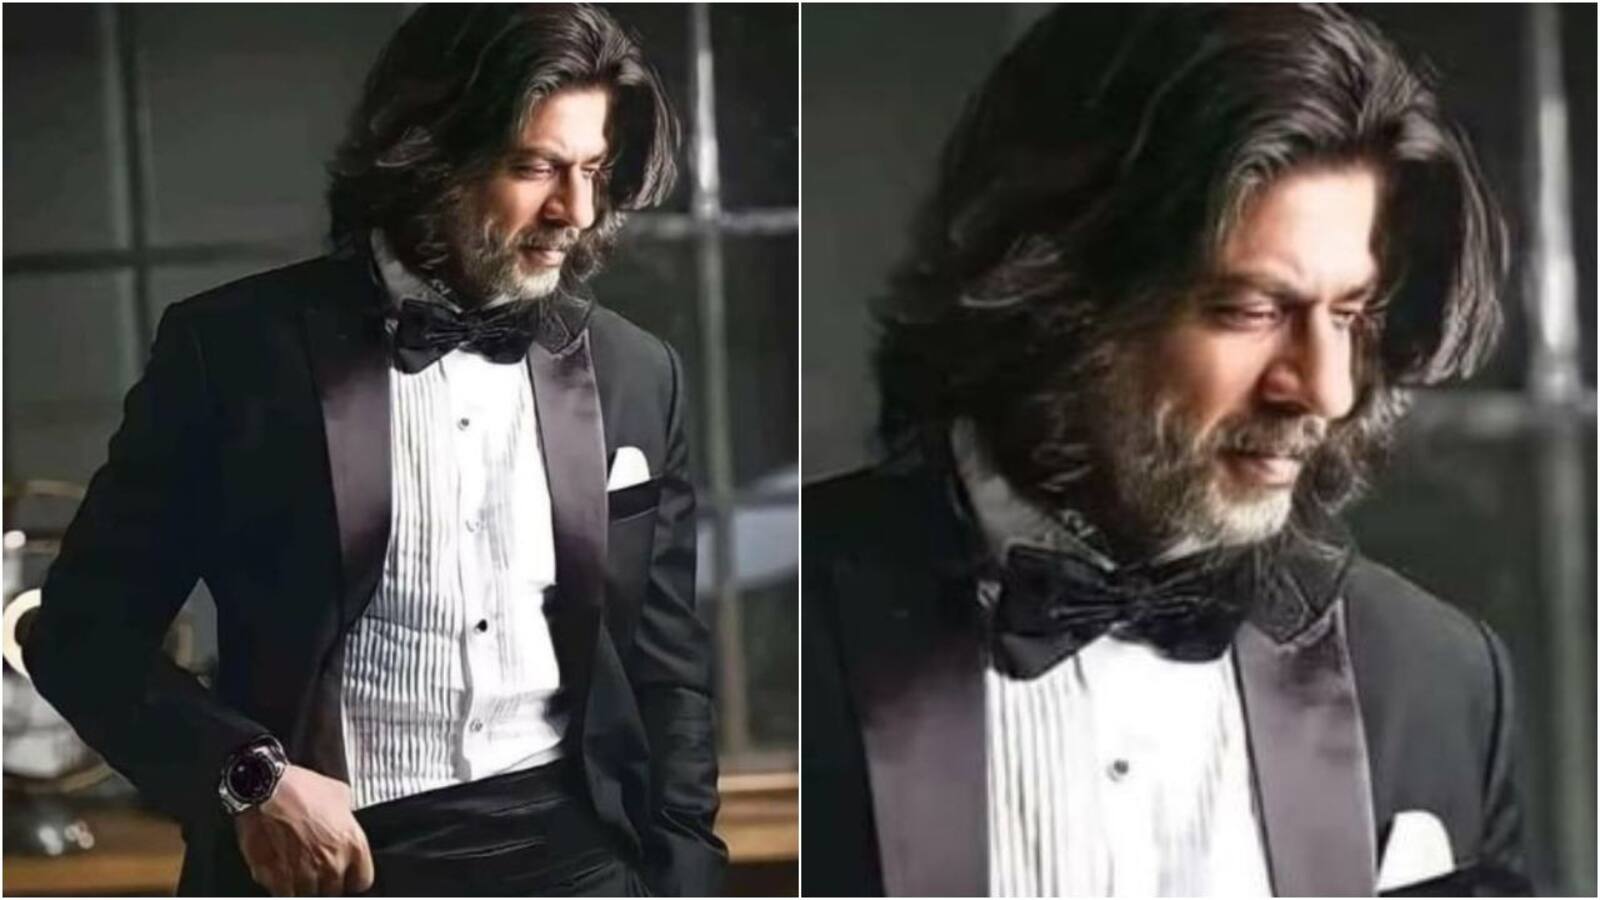 Shah Rukh Khan looks dapper in long hair and salt-pepper beard in this VIRAL pic but is it an original photo? Here's the truth